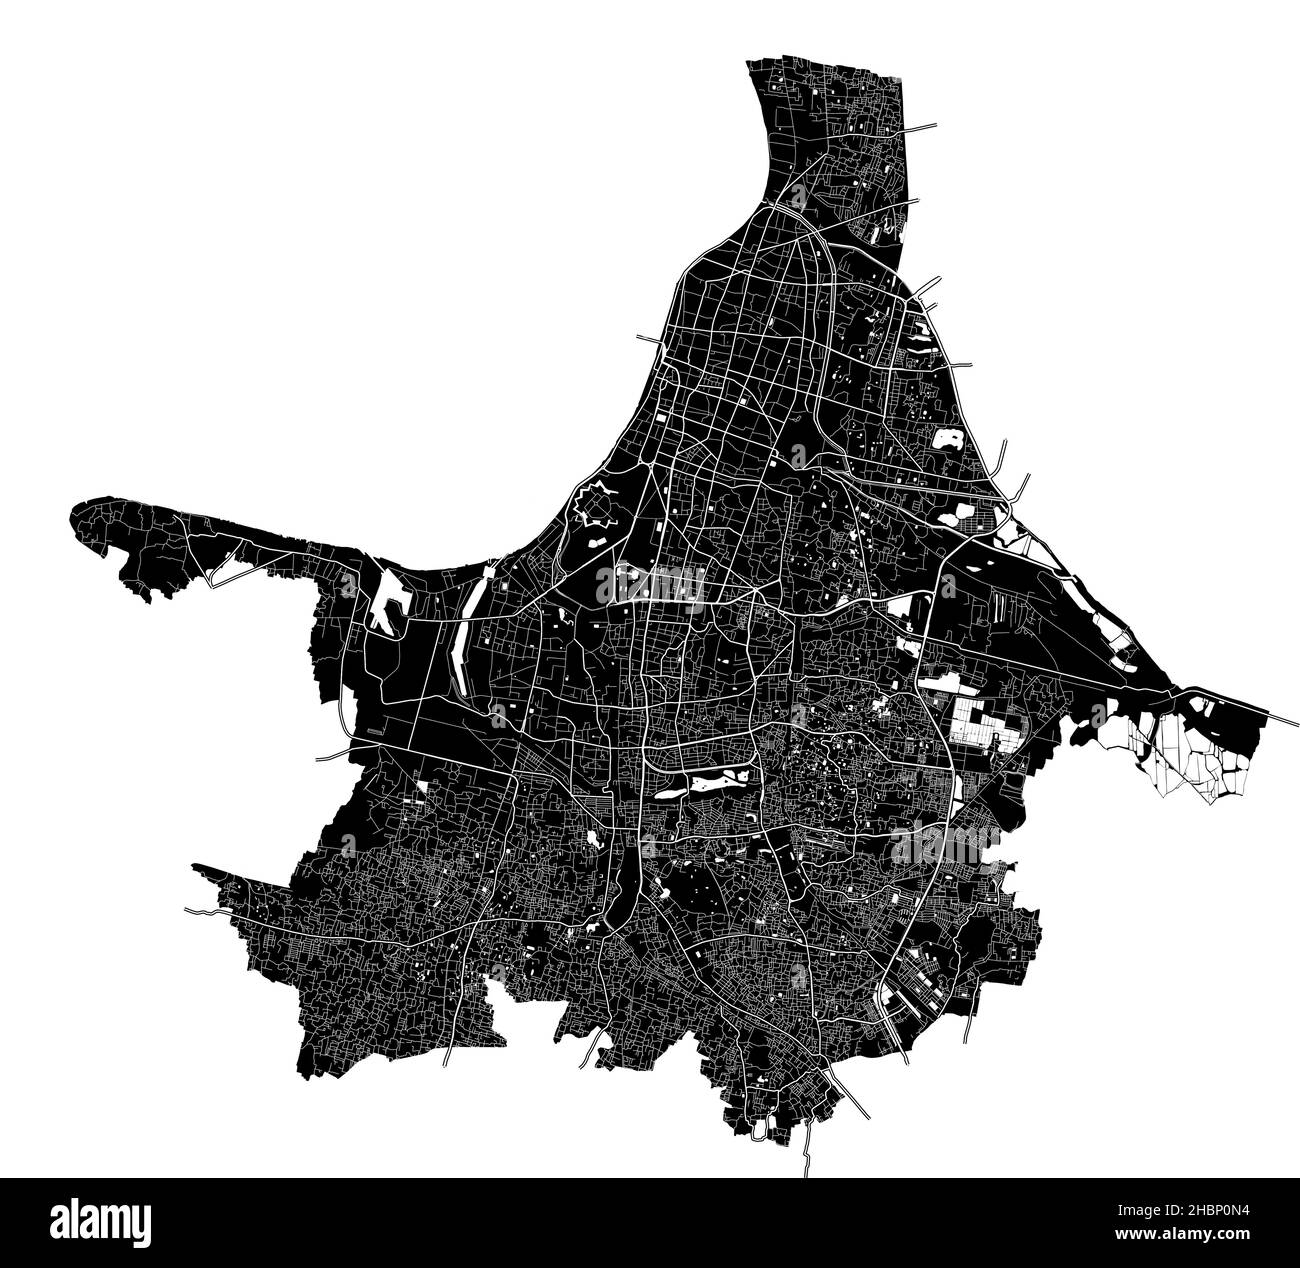 Kolkata, India, high resolution vector map with city boundaries, and editable paths. The city map was drawn with white areas and lines for main roads, Stock Vector